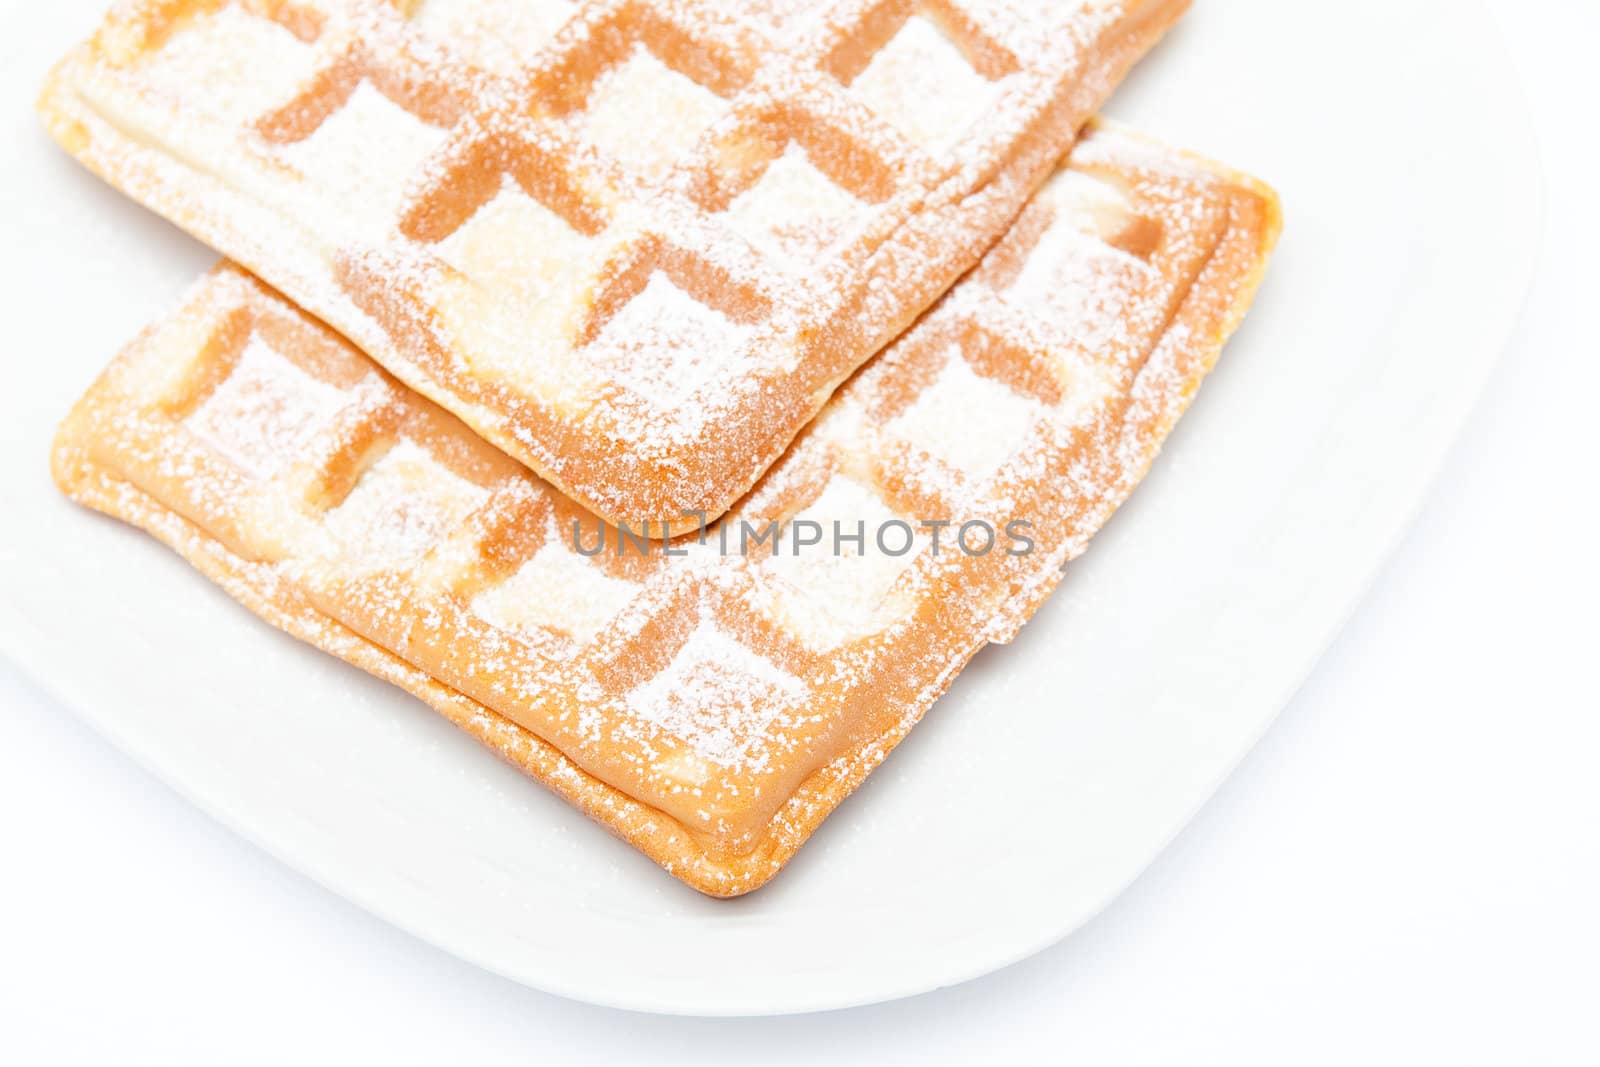 Two waffles on the white plate